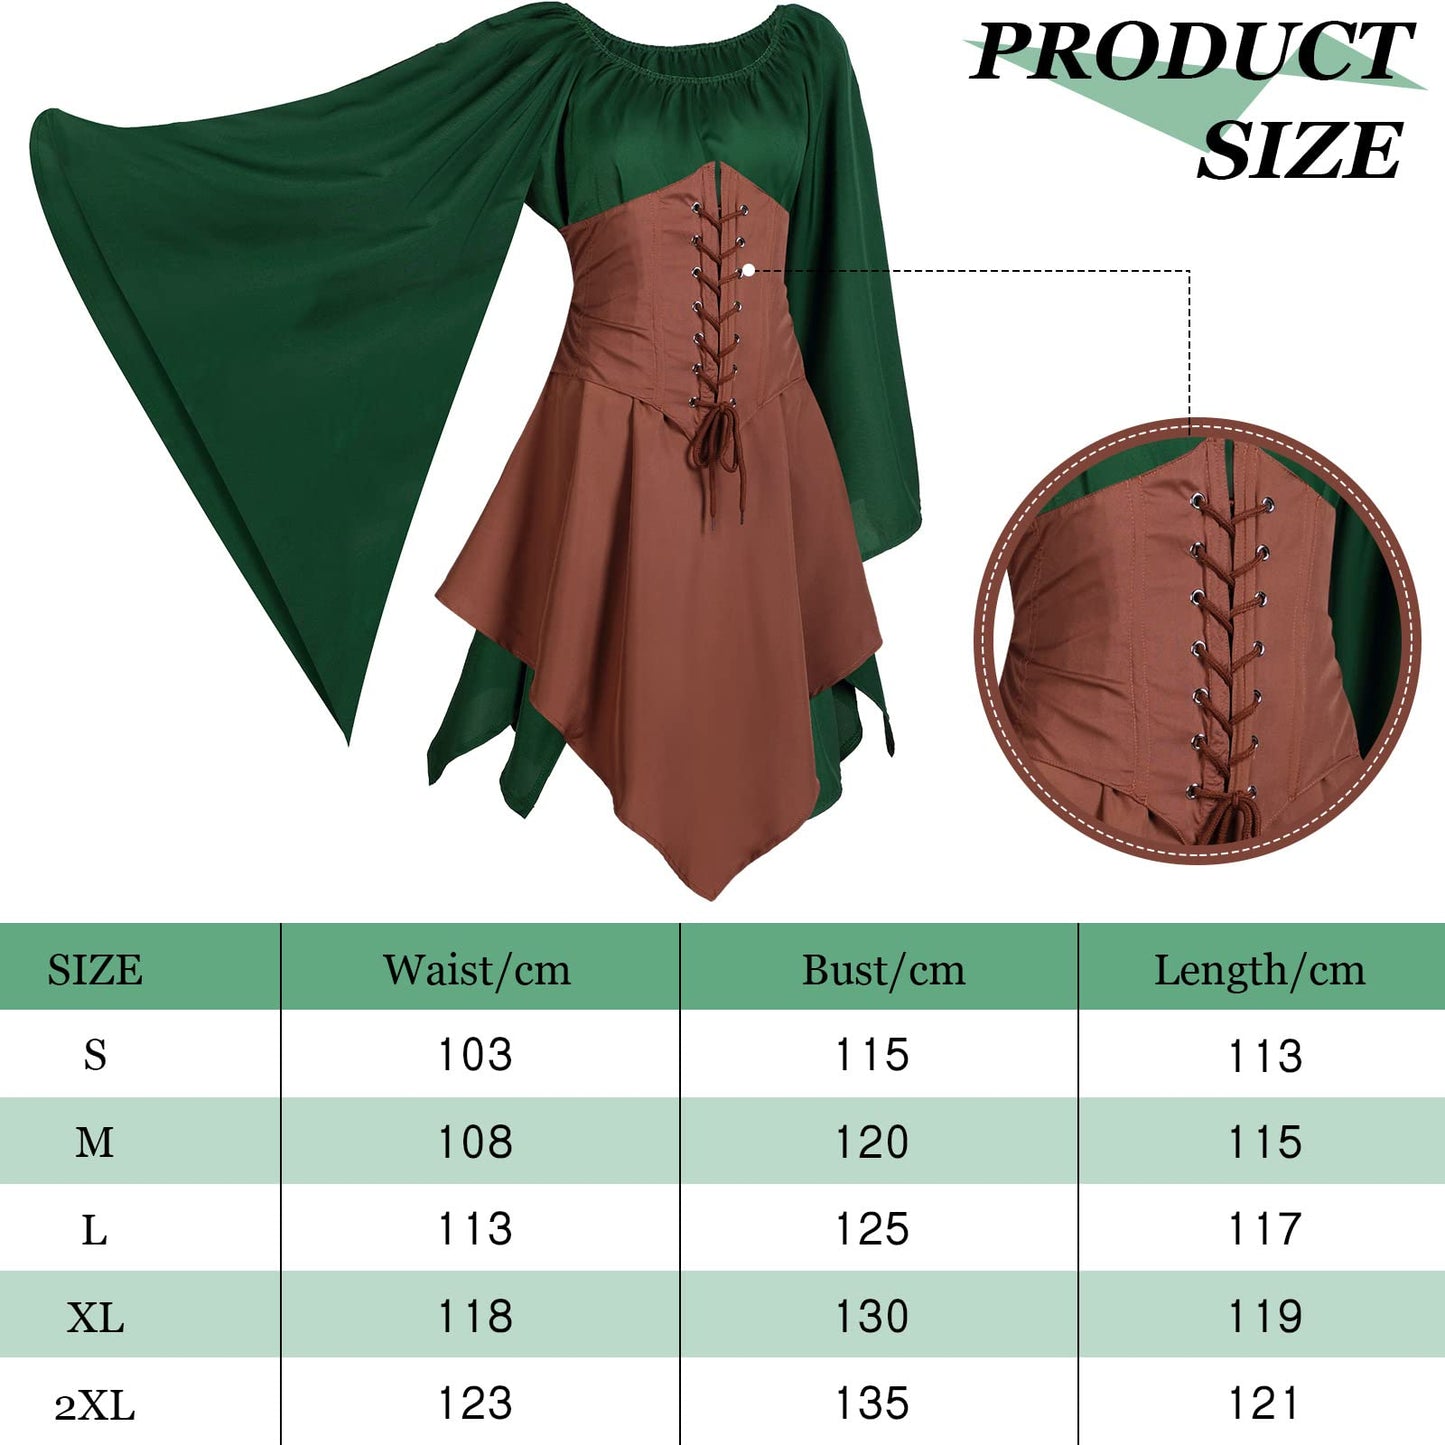 Pack of 5 Green and Brown Women's Renaissance Medieval Dress for Mardi Gras Carnival Dress Masquerade Party